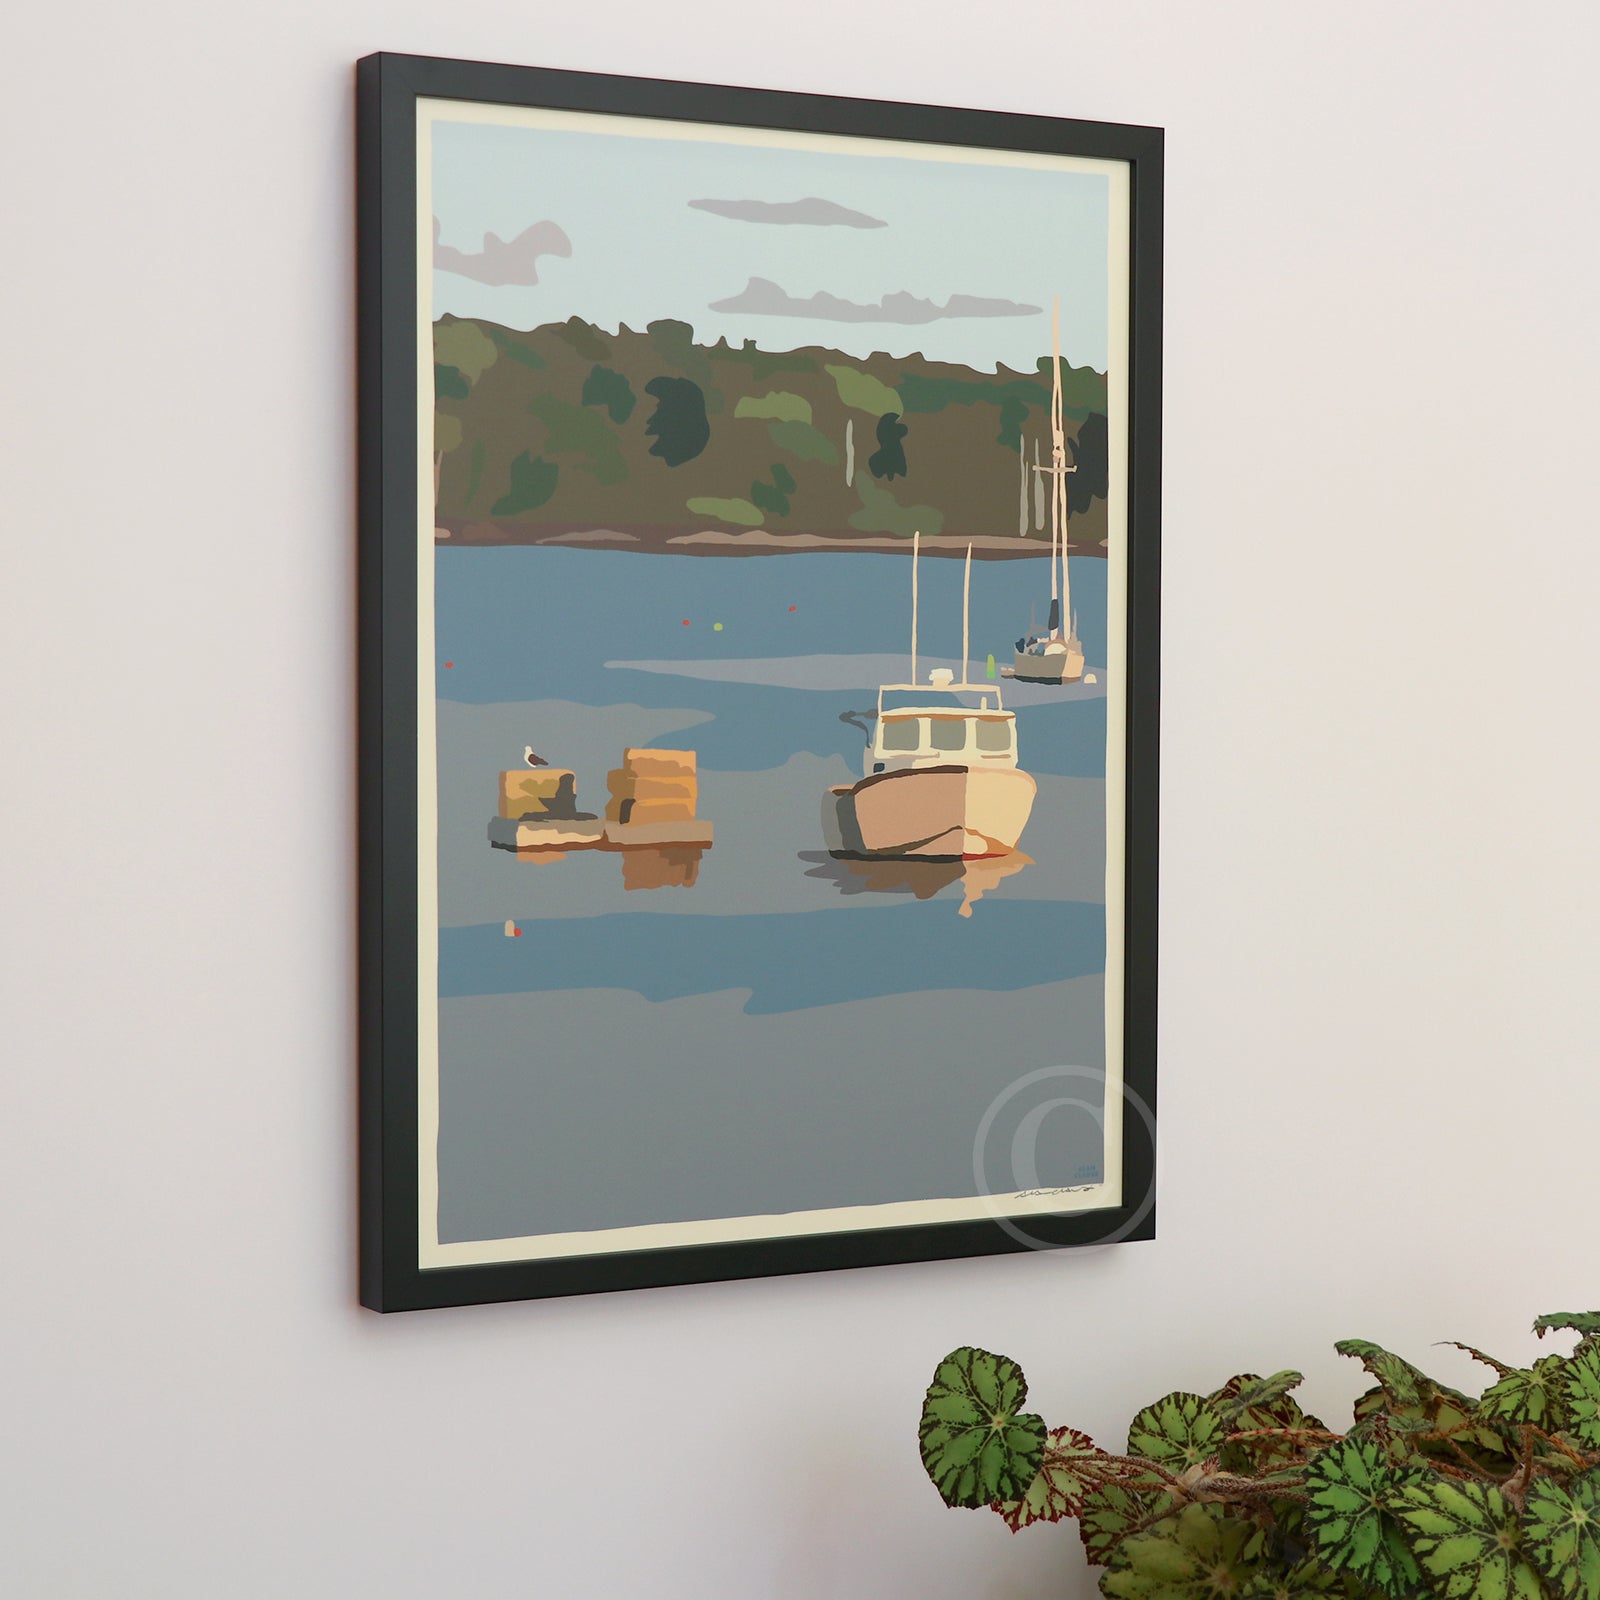 Lobster Boat in Round Pond Harbor Art Print 18" x 24” Vertical Framed Wall Poster By Alan Claude - Maine